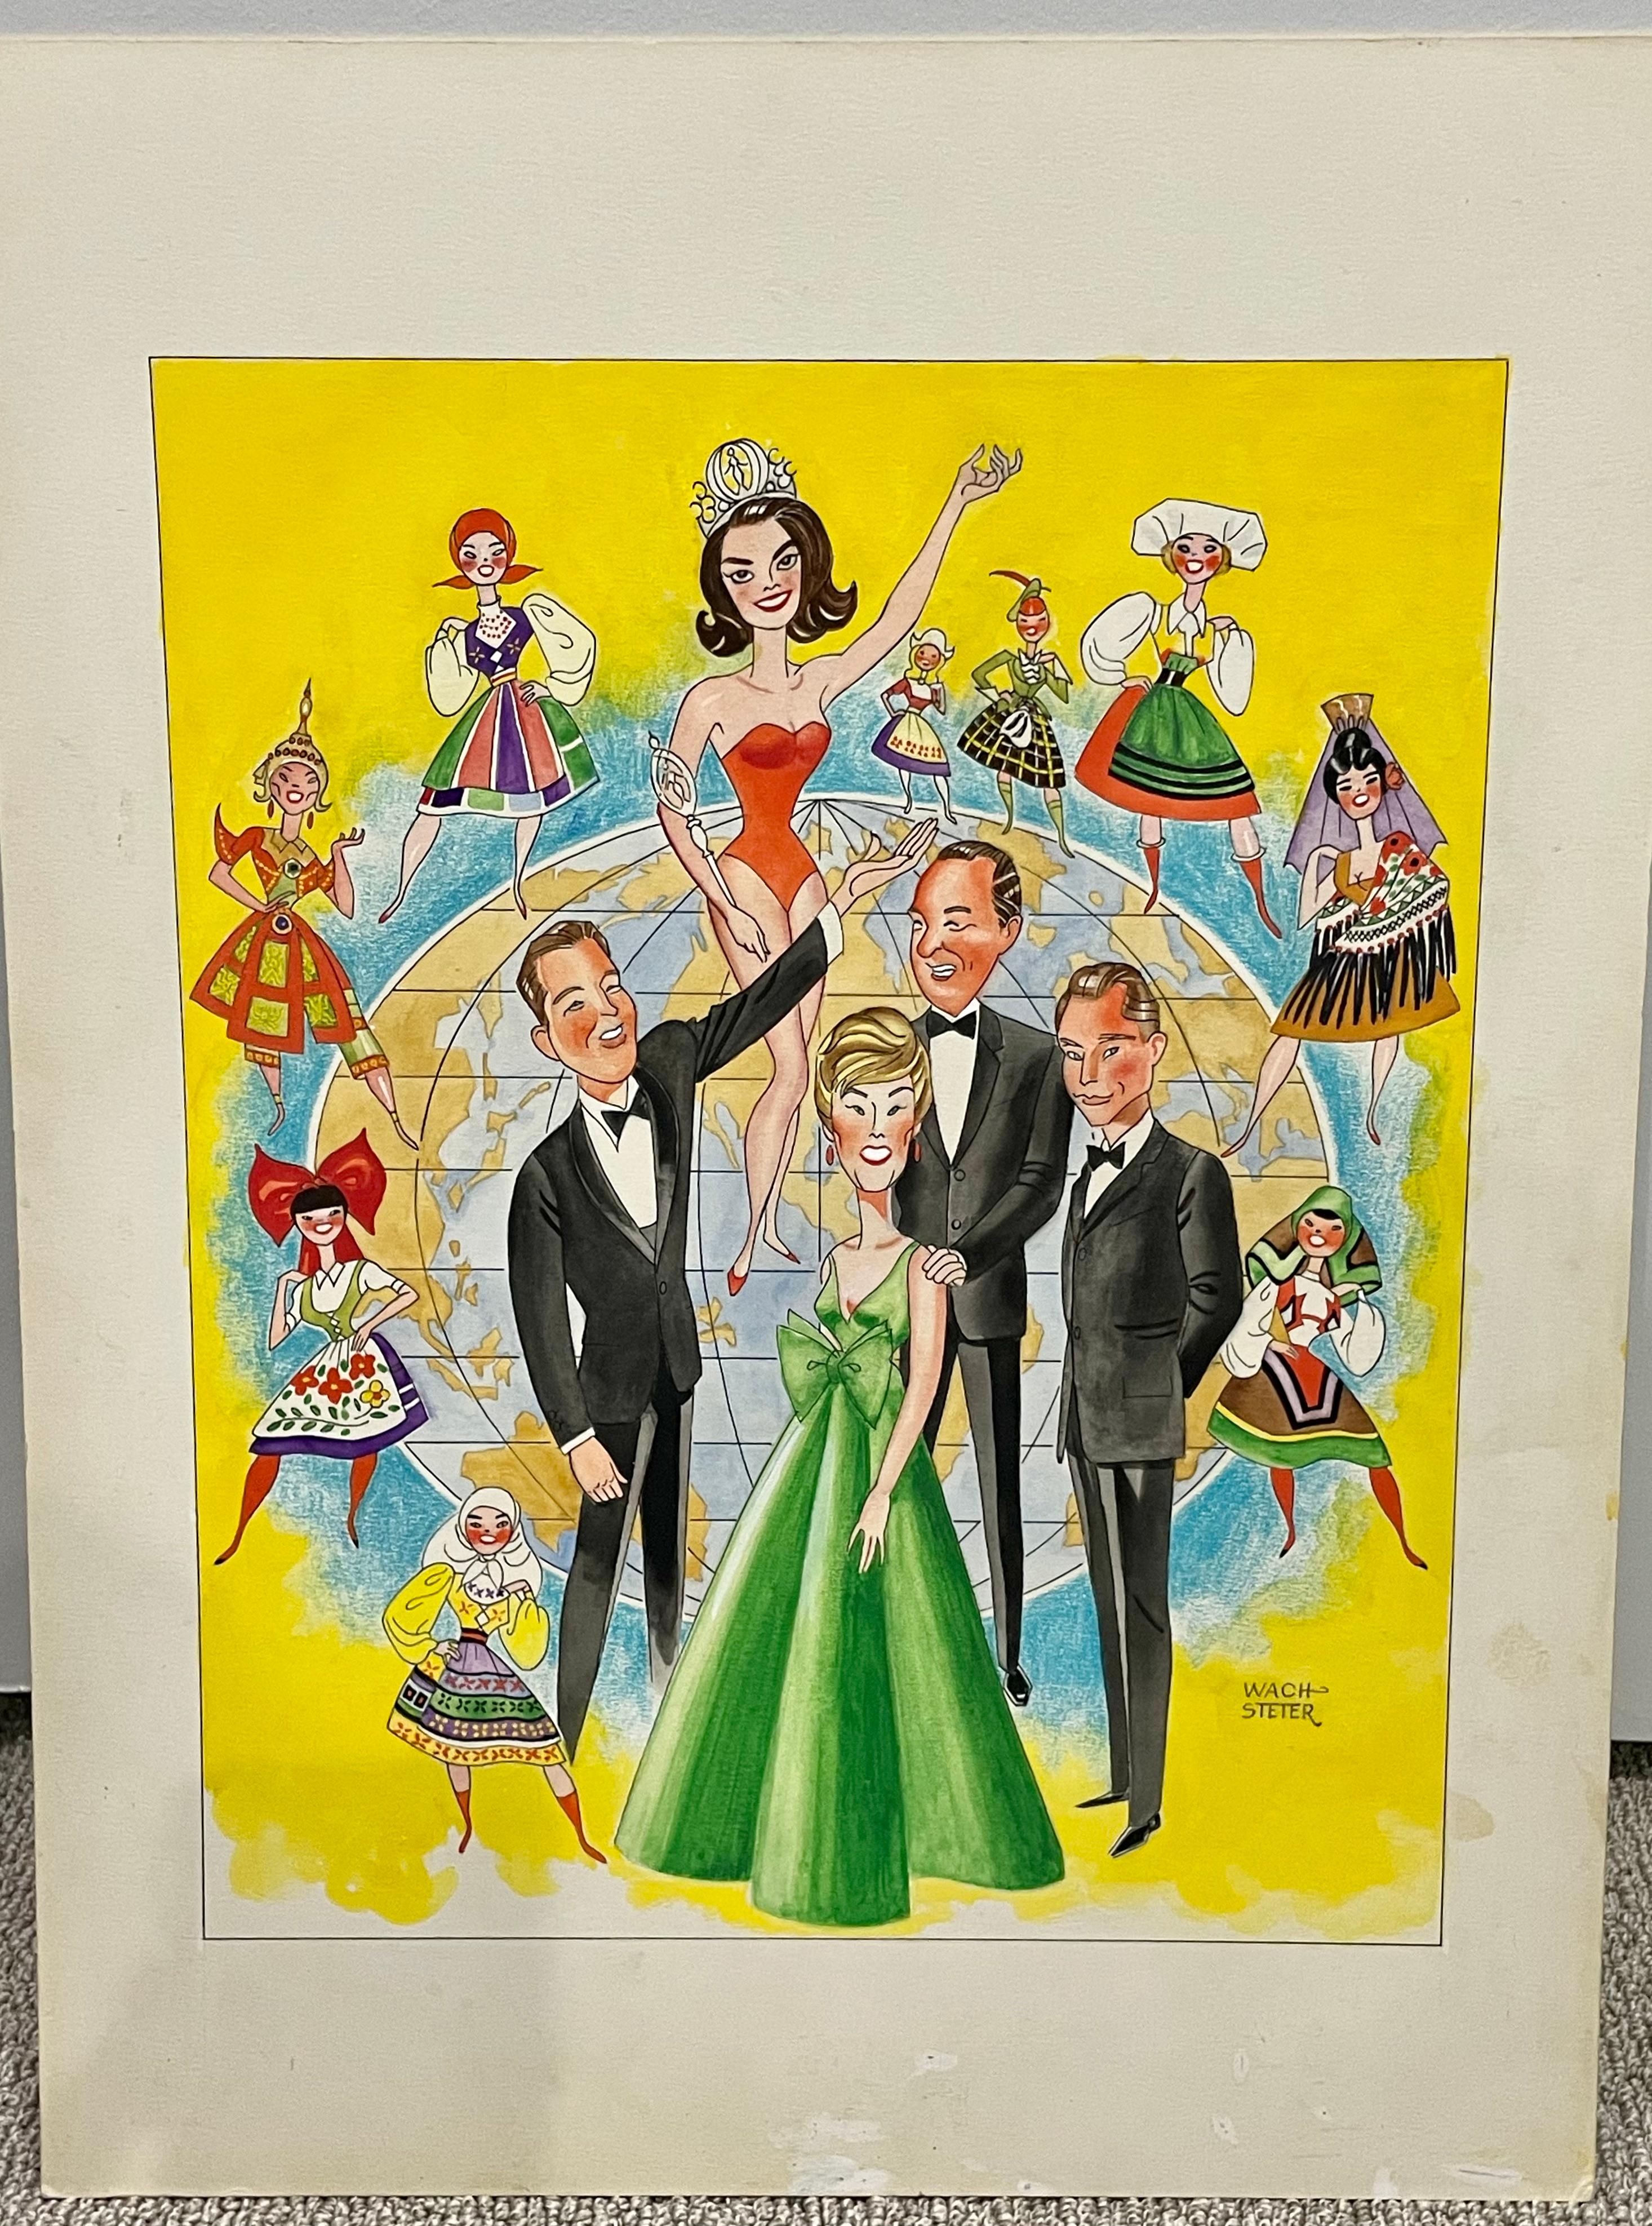 Signed Lower Right by Artist

Caricature by George Wachsteter (1911-2004) for the 1965 CBS telecast of 'The Miss Universe' Pageant with hosts Jack Linkletter, June Lockhart, John Daly & Pat Boone

Florida Accent on TV & Radio Paper Cover, July 18